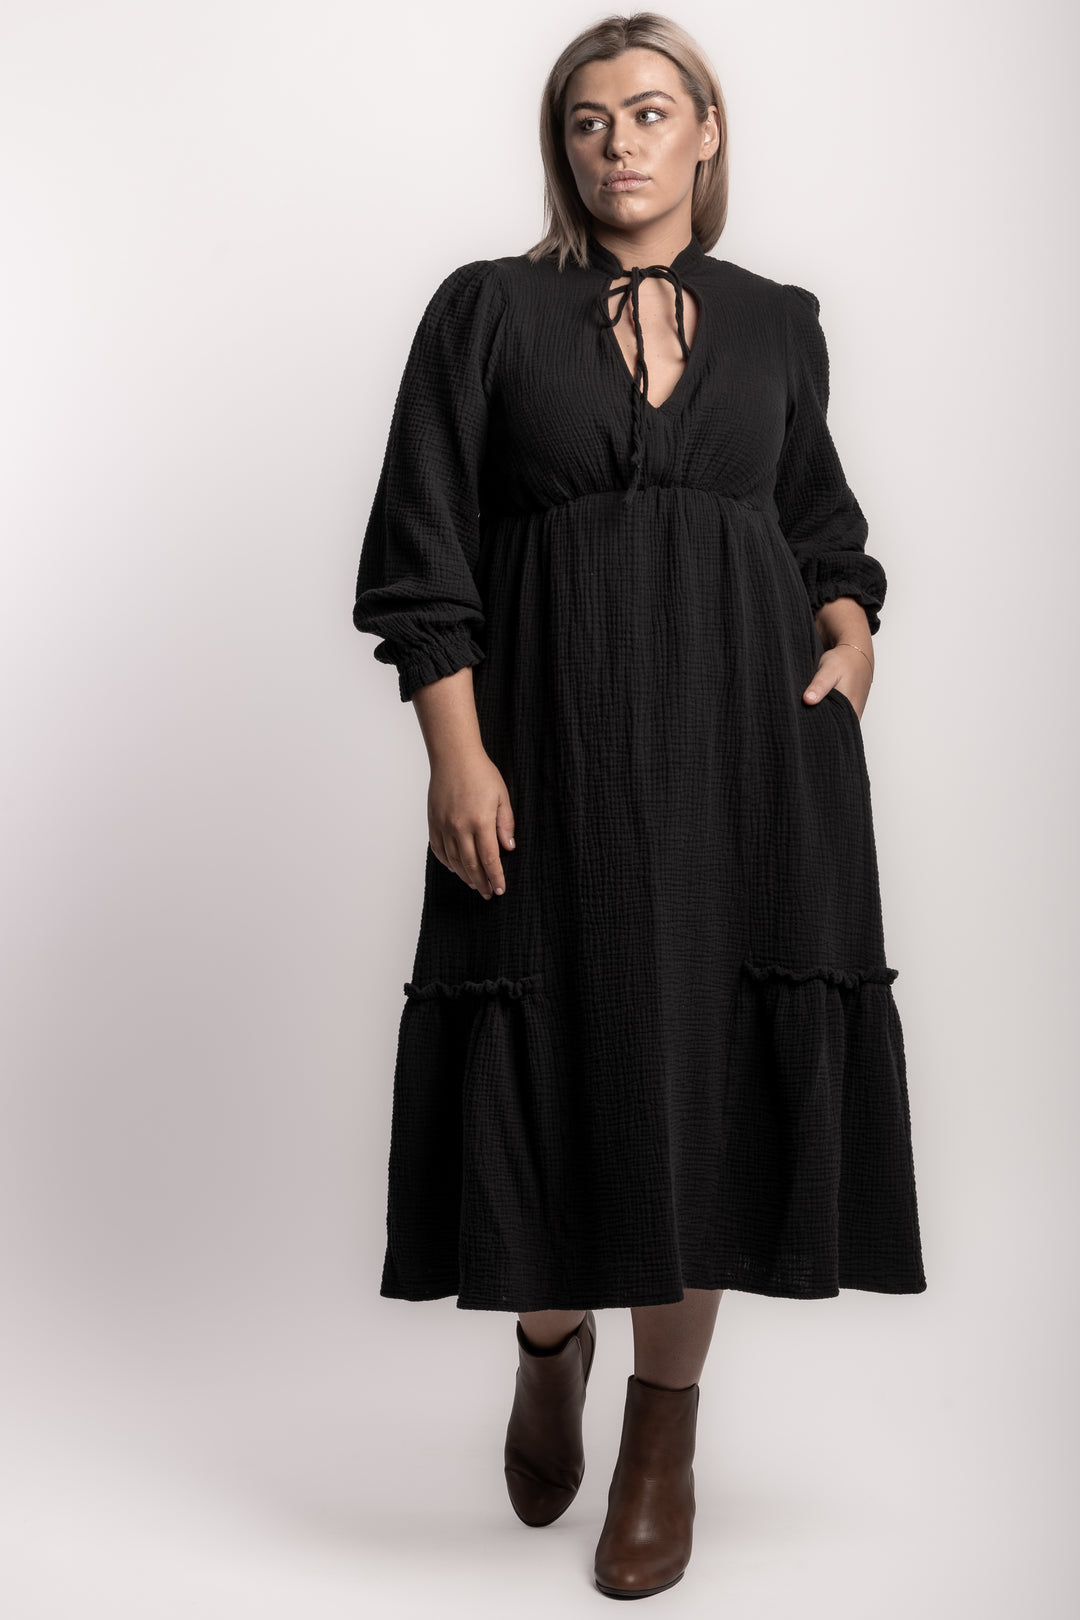 Sisters Of The Moon Maxi - Black - STOCK AVAILABLE - SIZE S (14/16) & L (22/24)